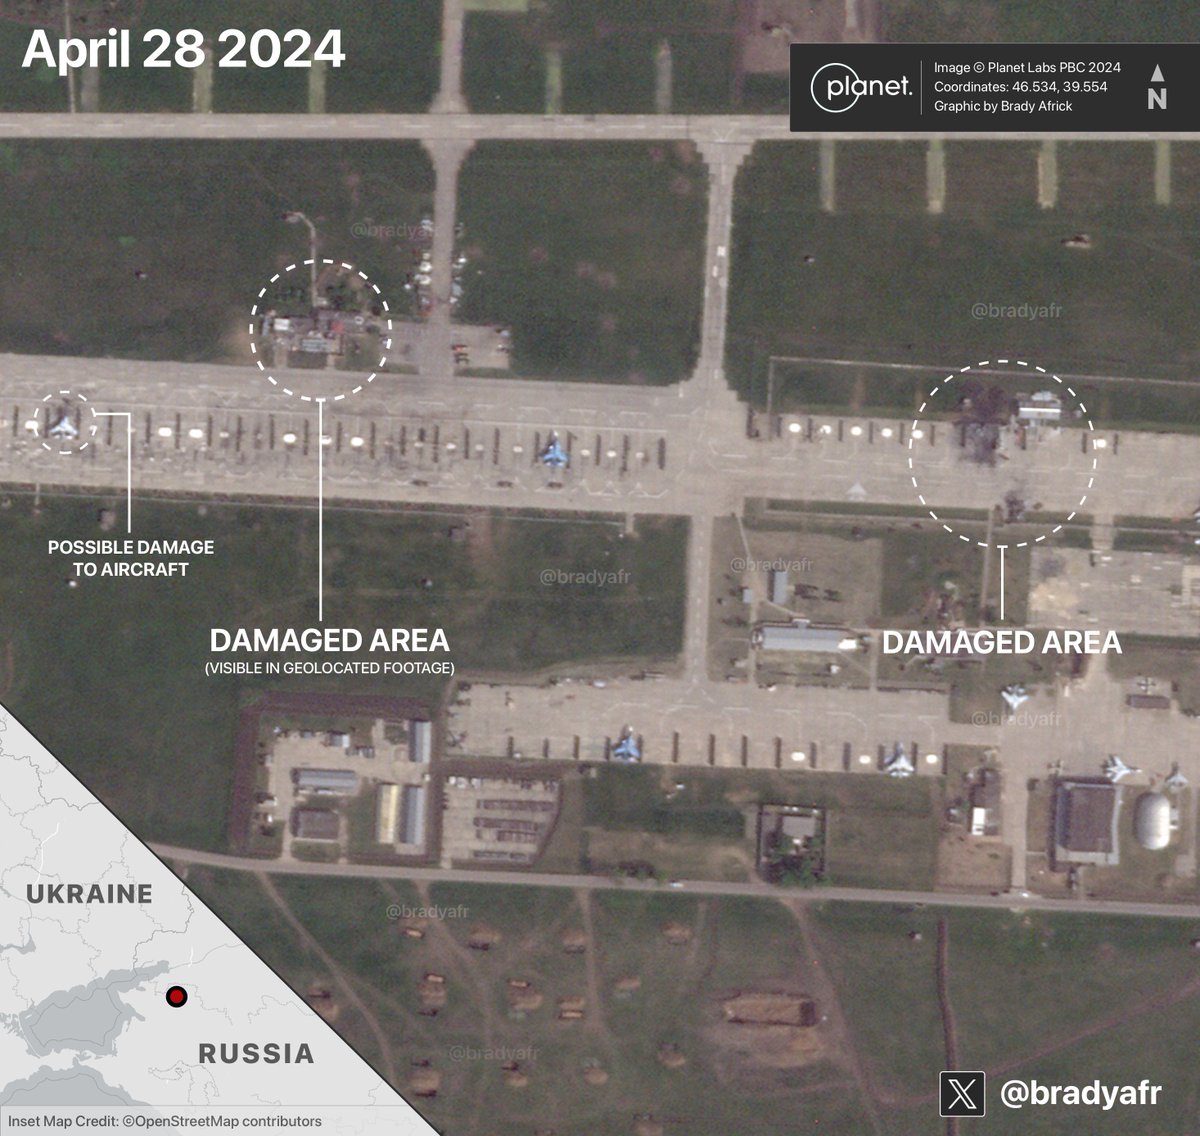 Geolocated footage of the destroyed Russian glide bomb kits at this site and satellite imagery from today show Ukraine's recent strike damaged several different areas at Russia's Kushchyovskaya air base. twitter.com/moklasen/statu…